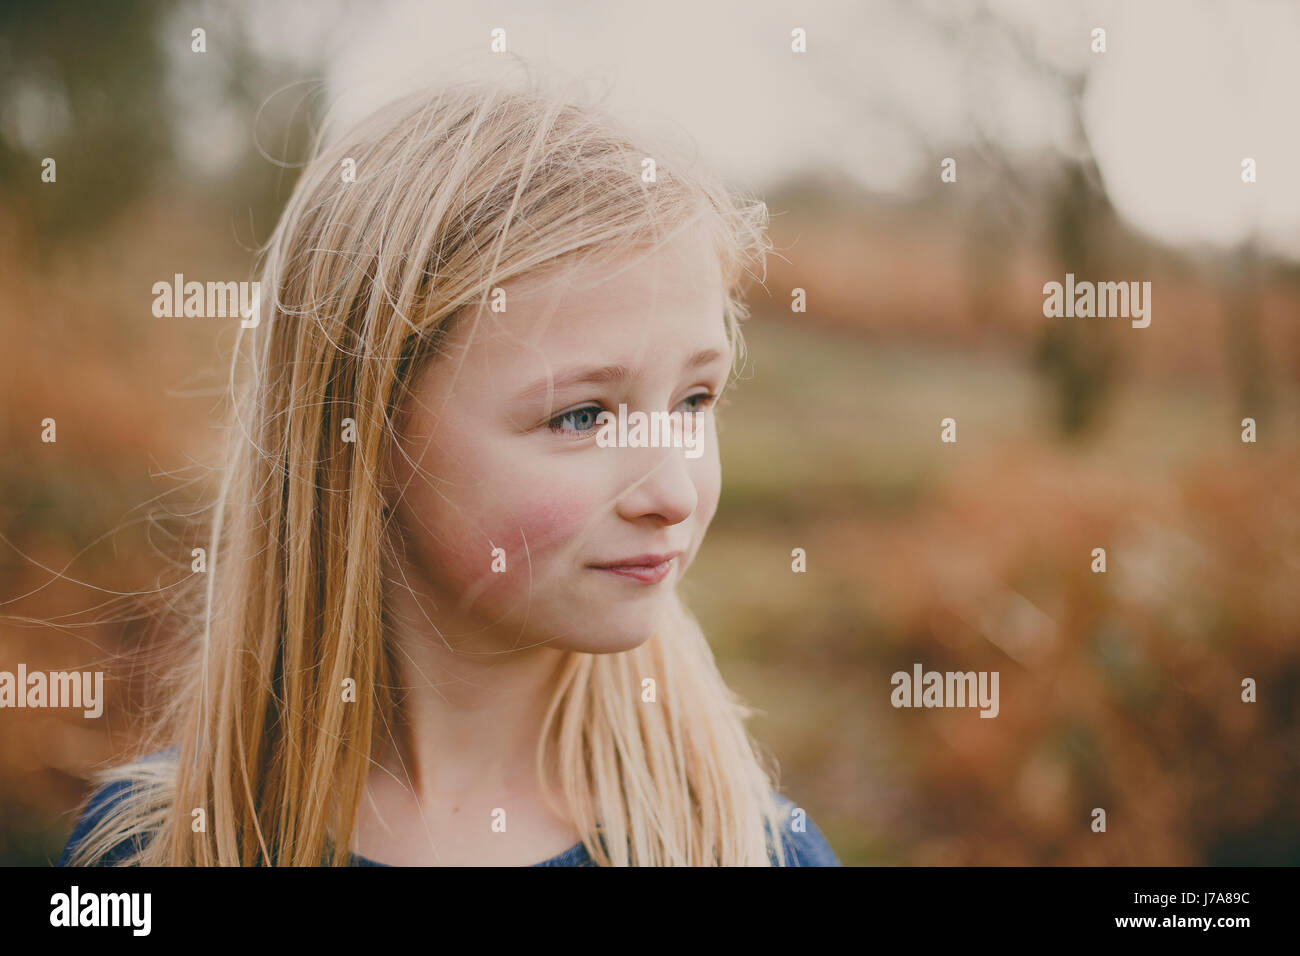 Portrait of a blond girl outdoors Stock Photo